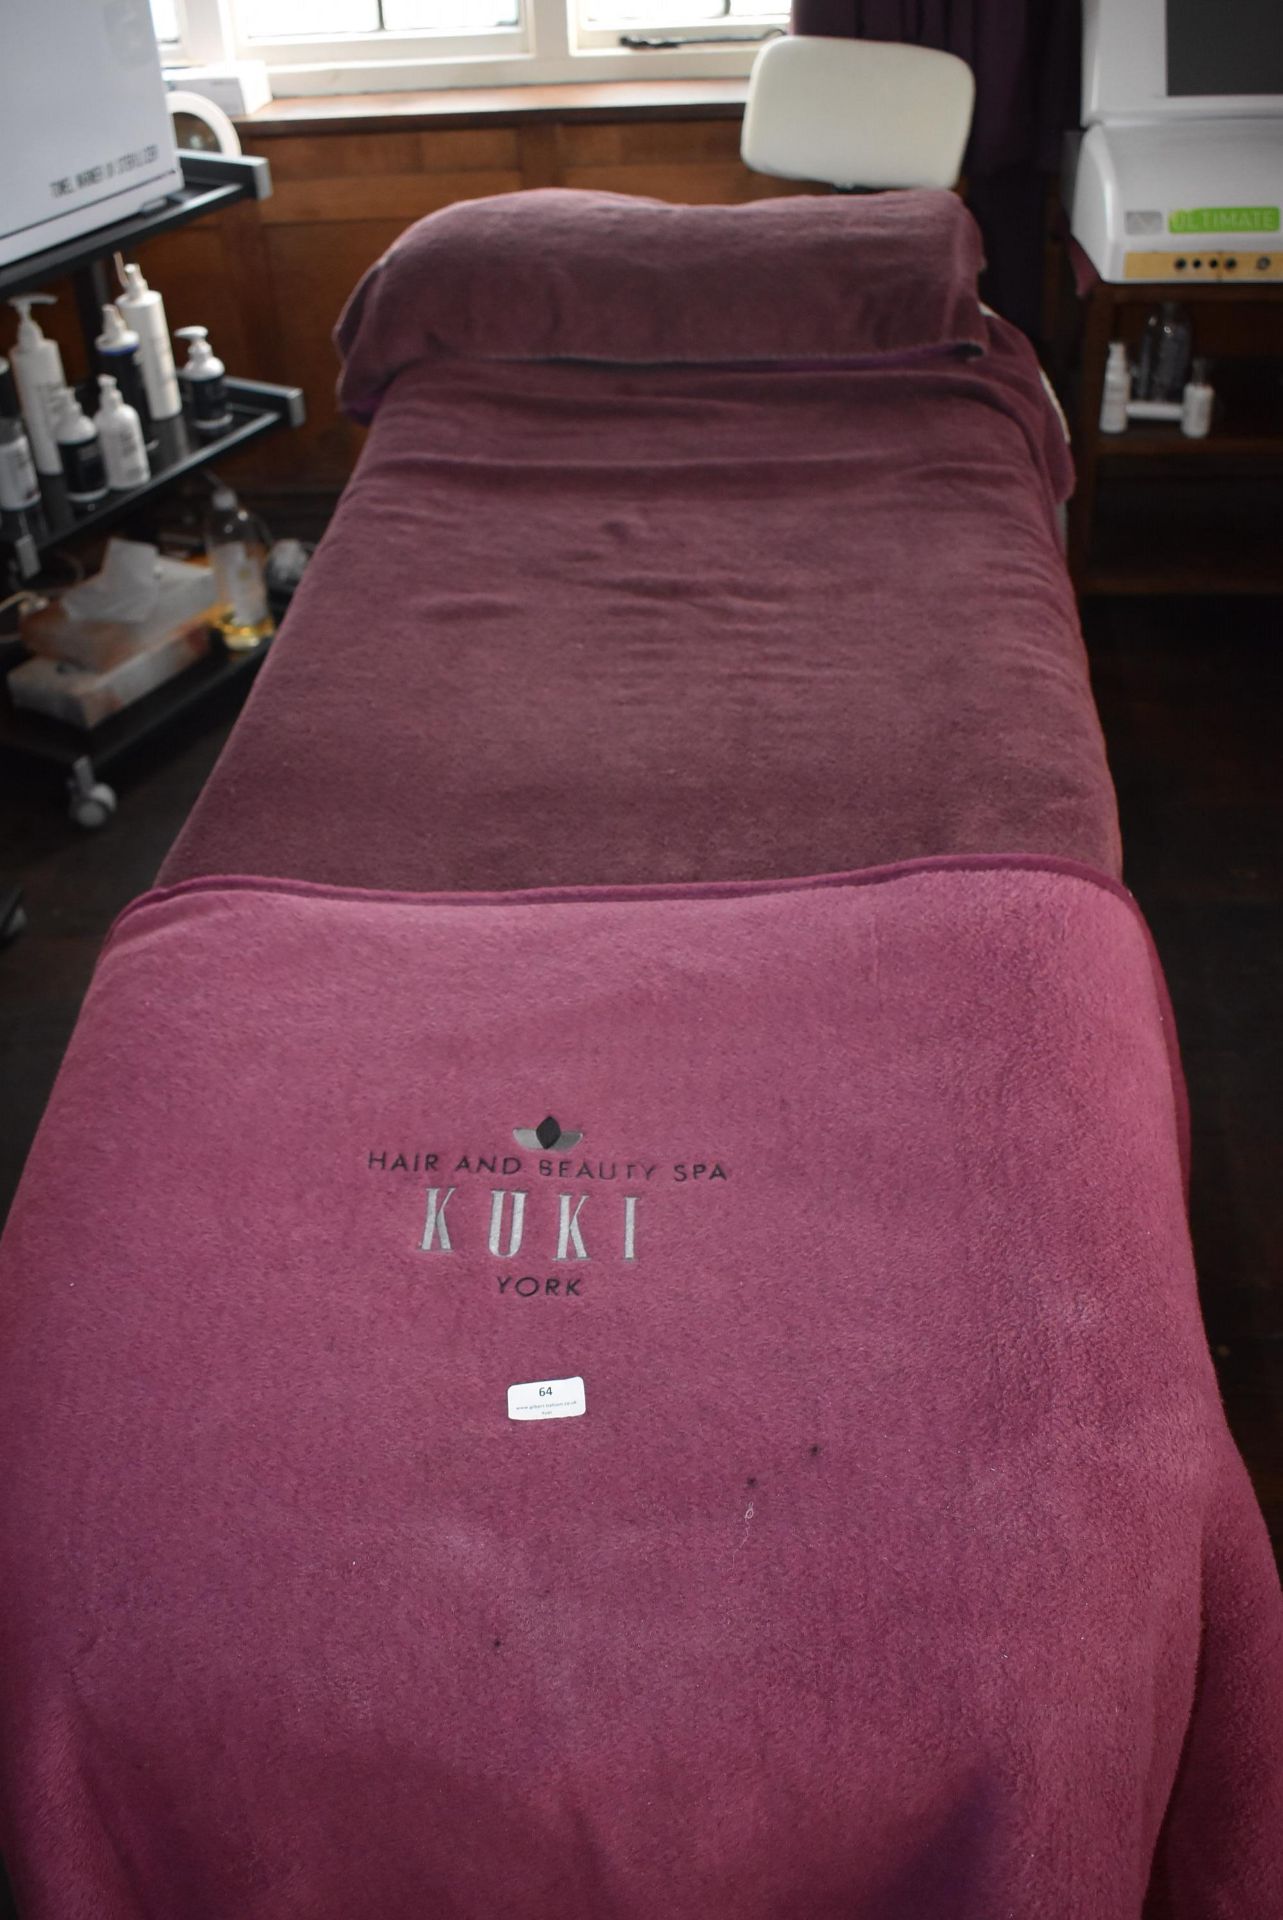 *Multipositional Electrically Operated Massage Bed